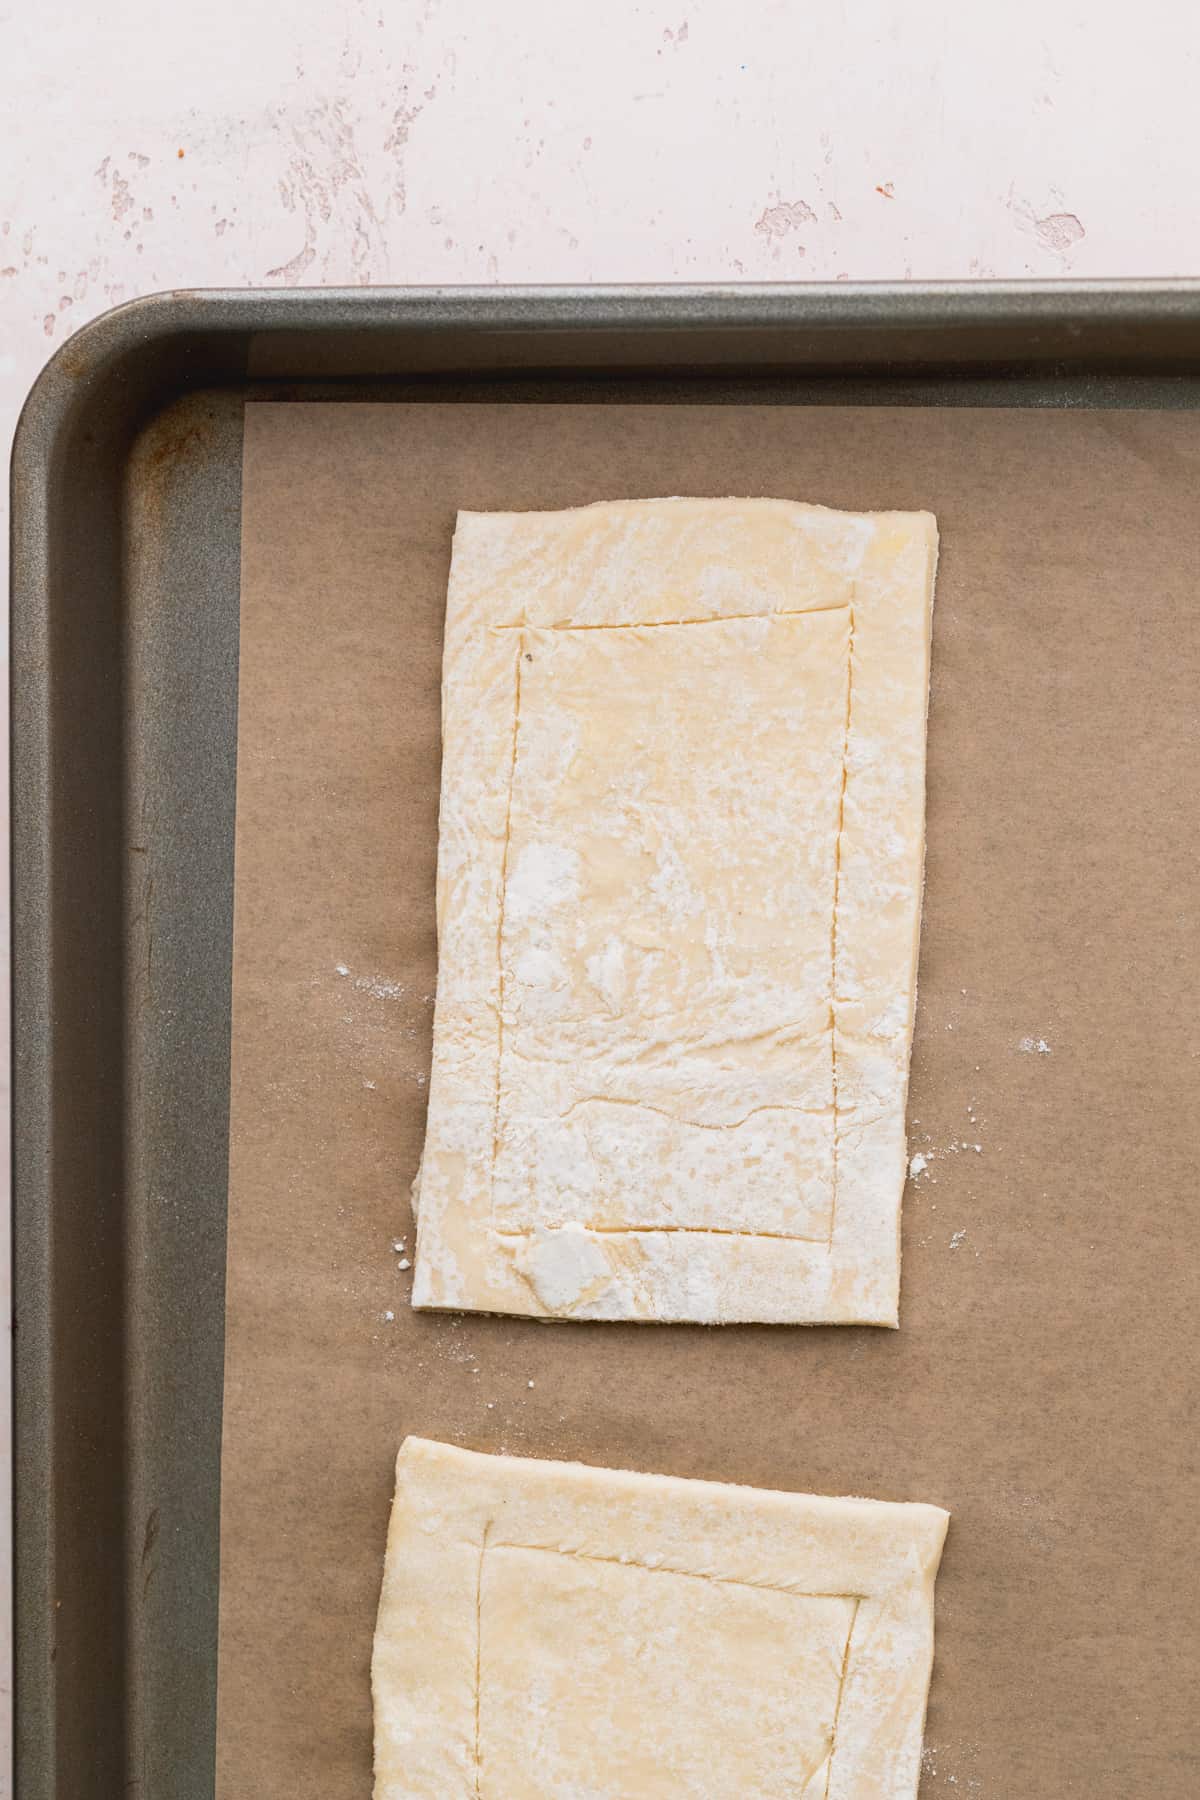 Puff pastry sheet on a cookie sheet.